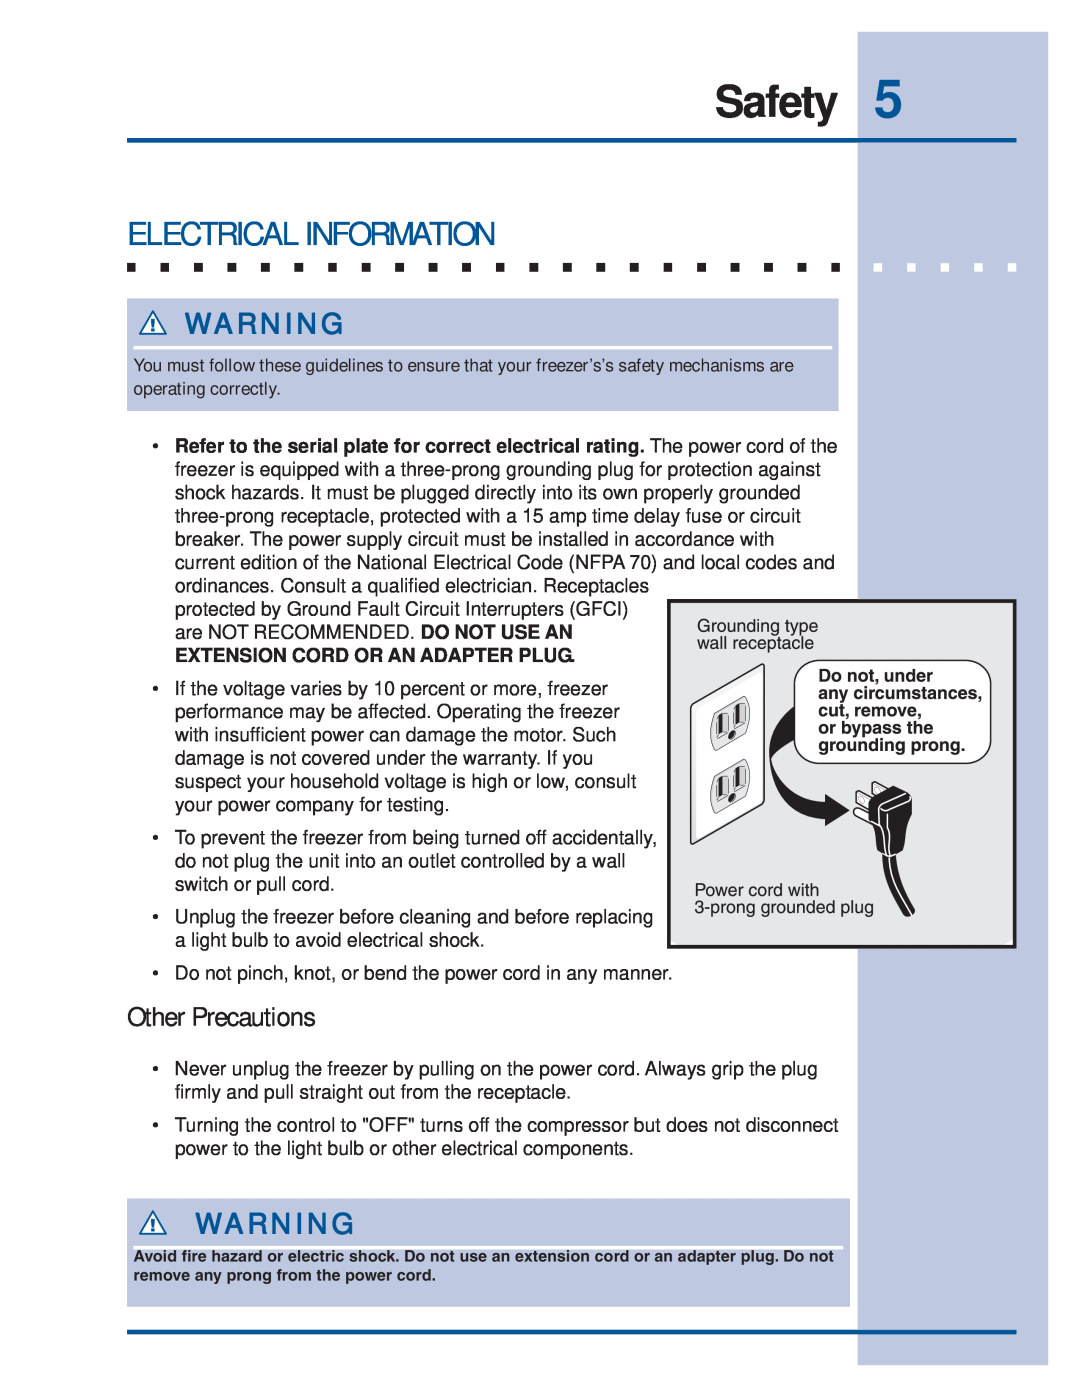 Electrolux 297122900 (0608) manual Safety, Electrical Information, Other Precautions 